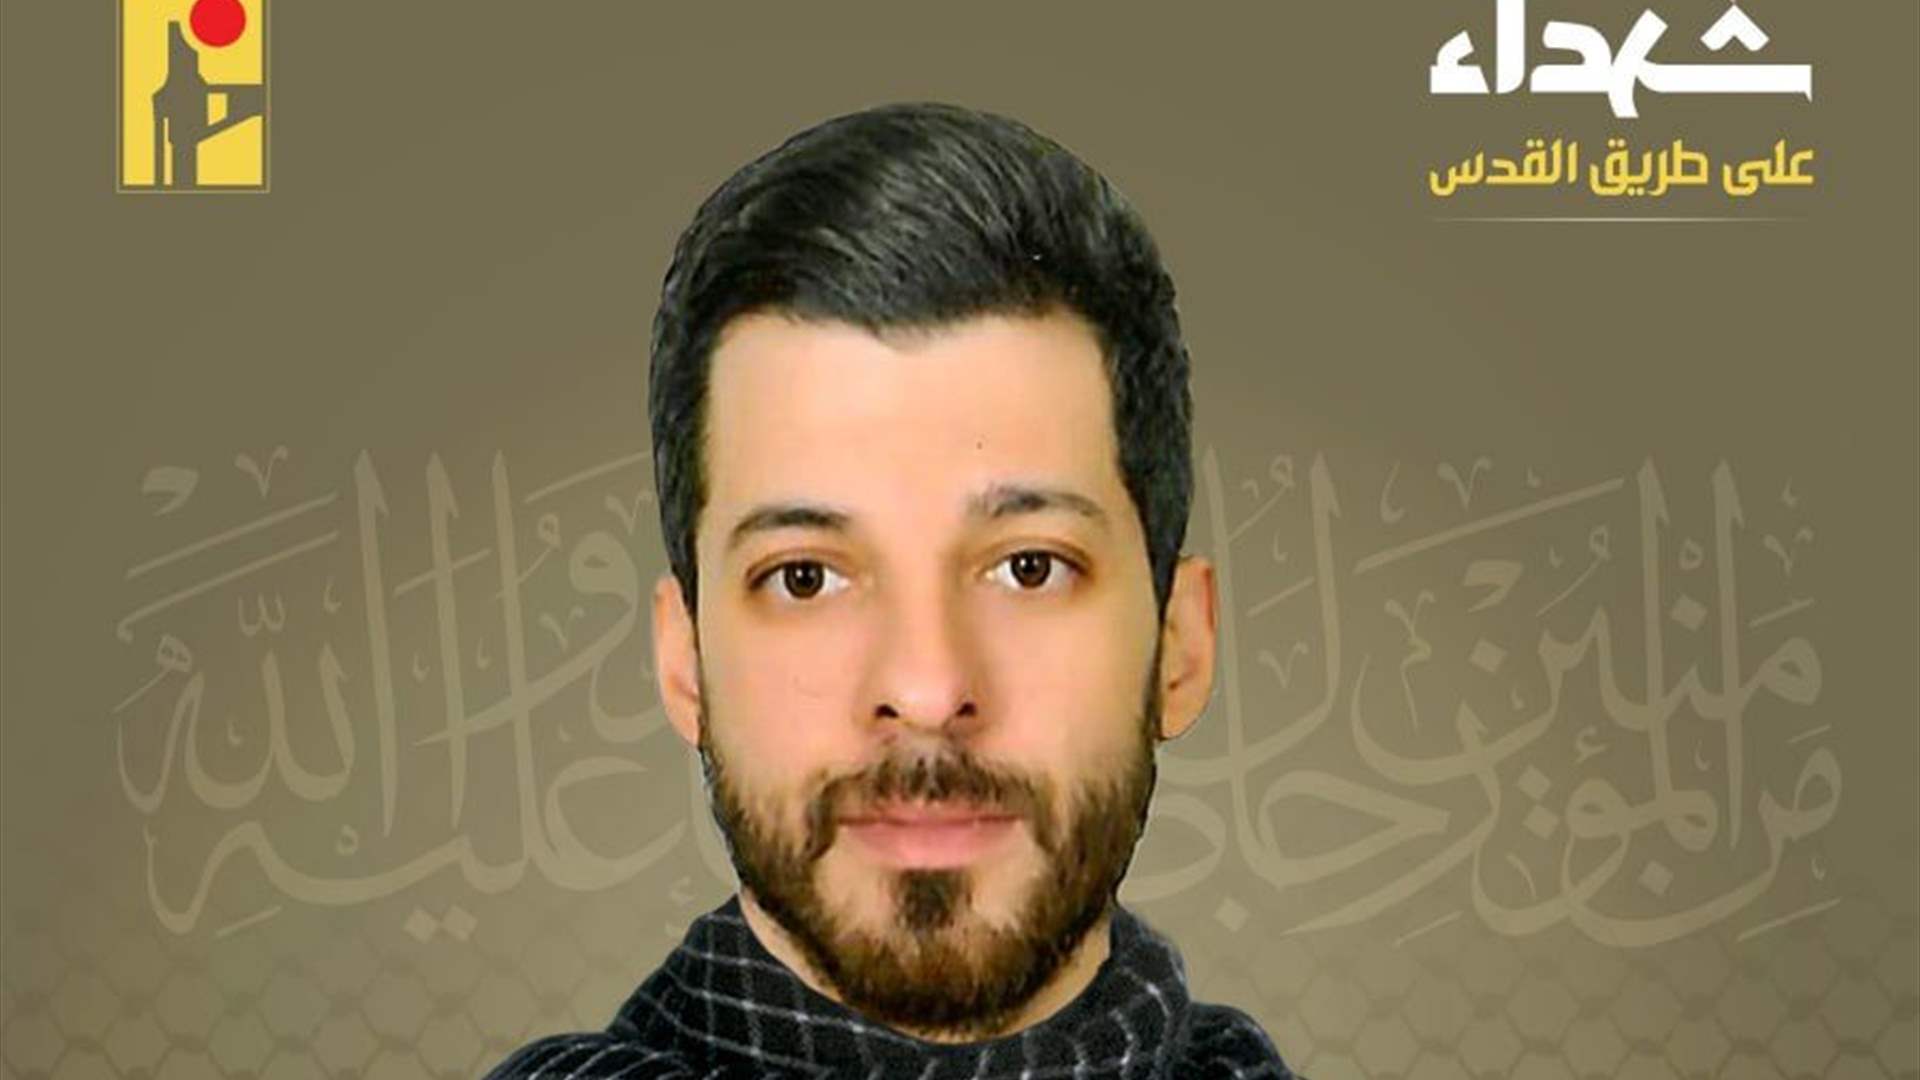 Islamic Resistance mourns its martyr Ahmad Mohammed Salim from Beirut&#39;s southern suburbs